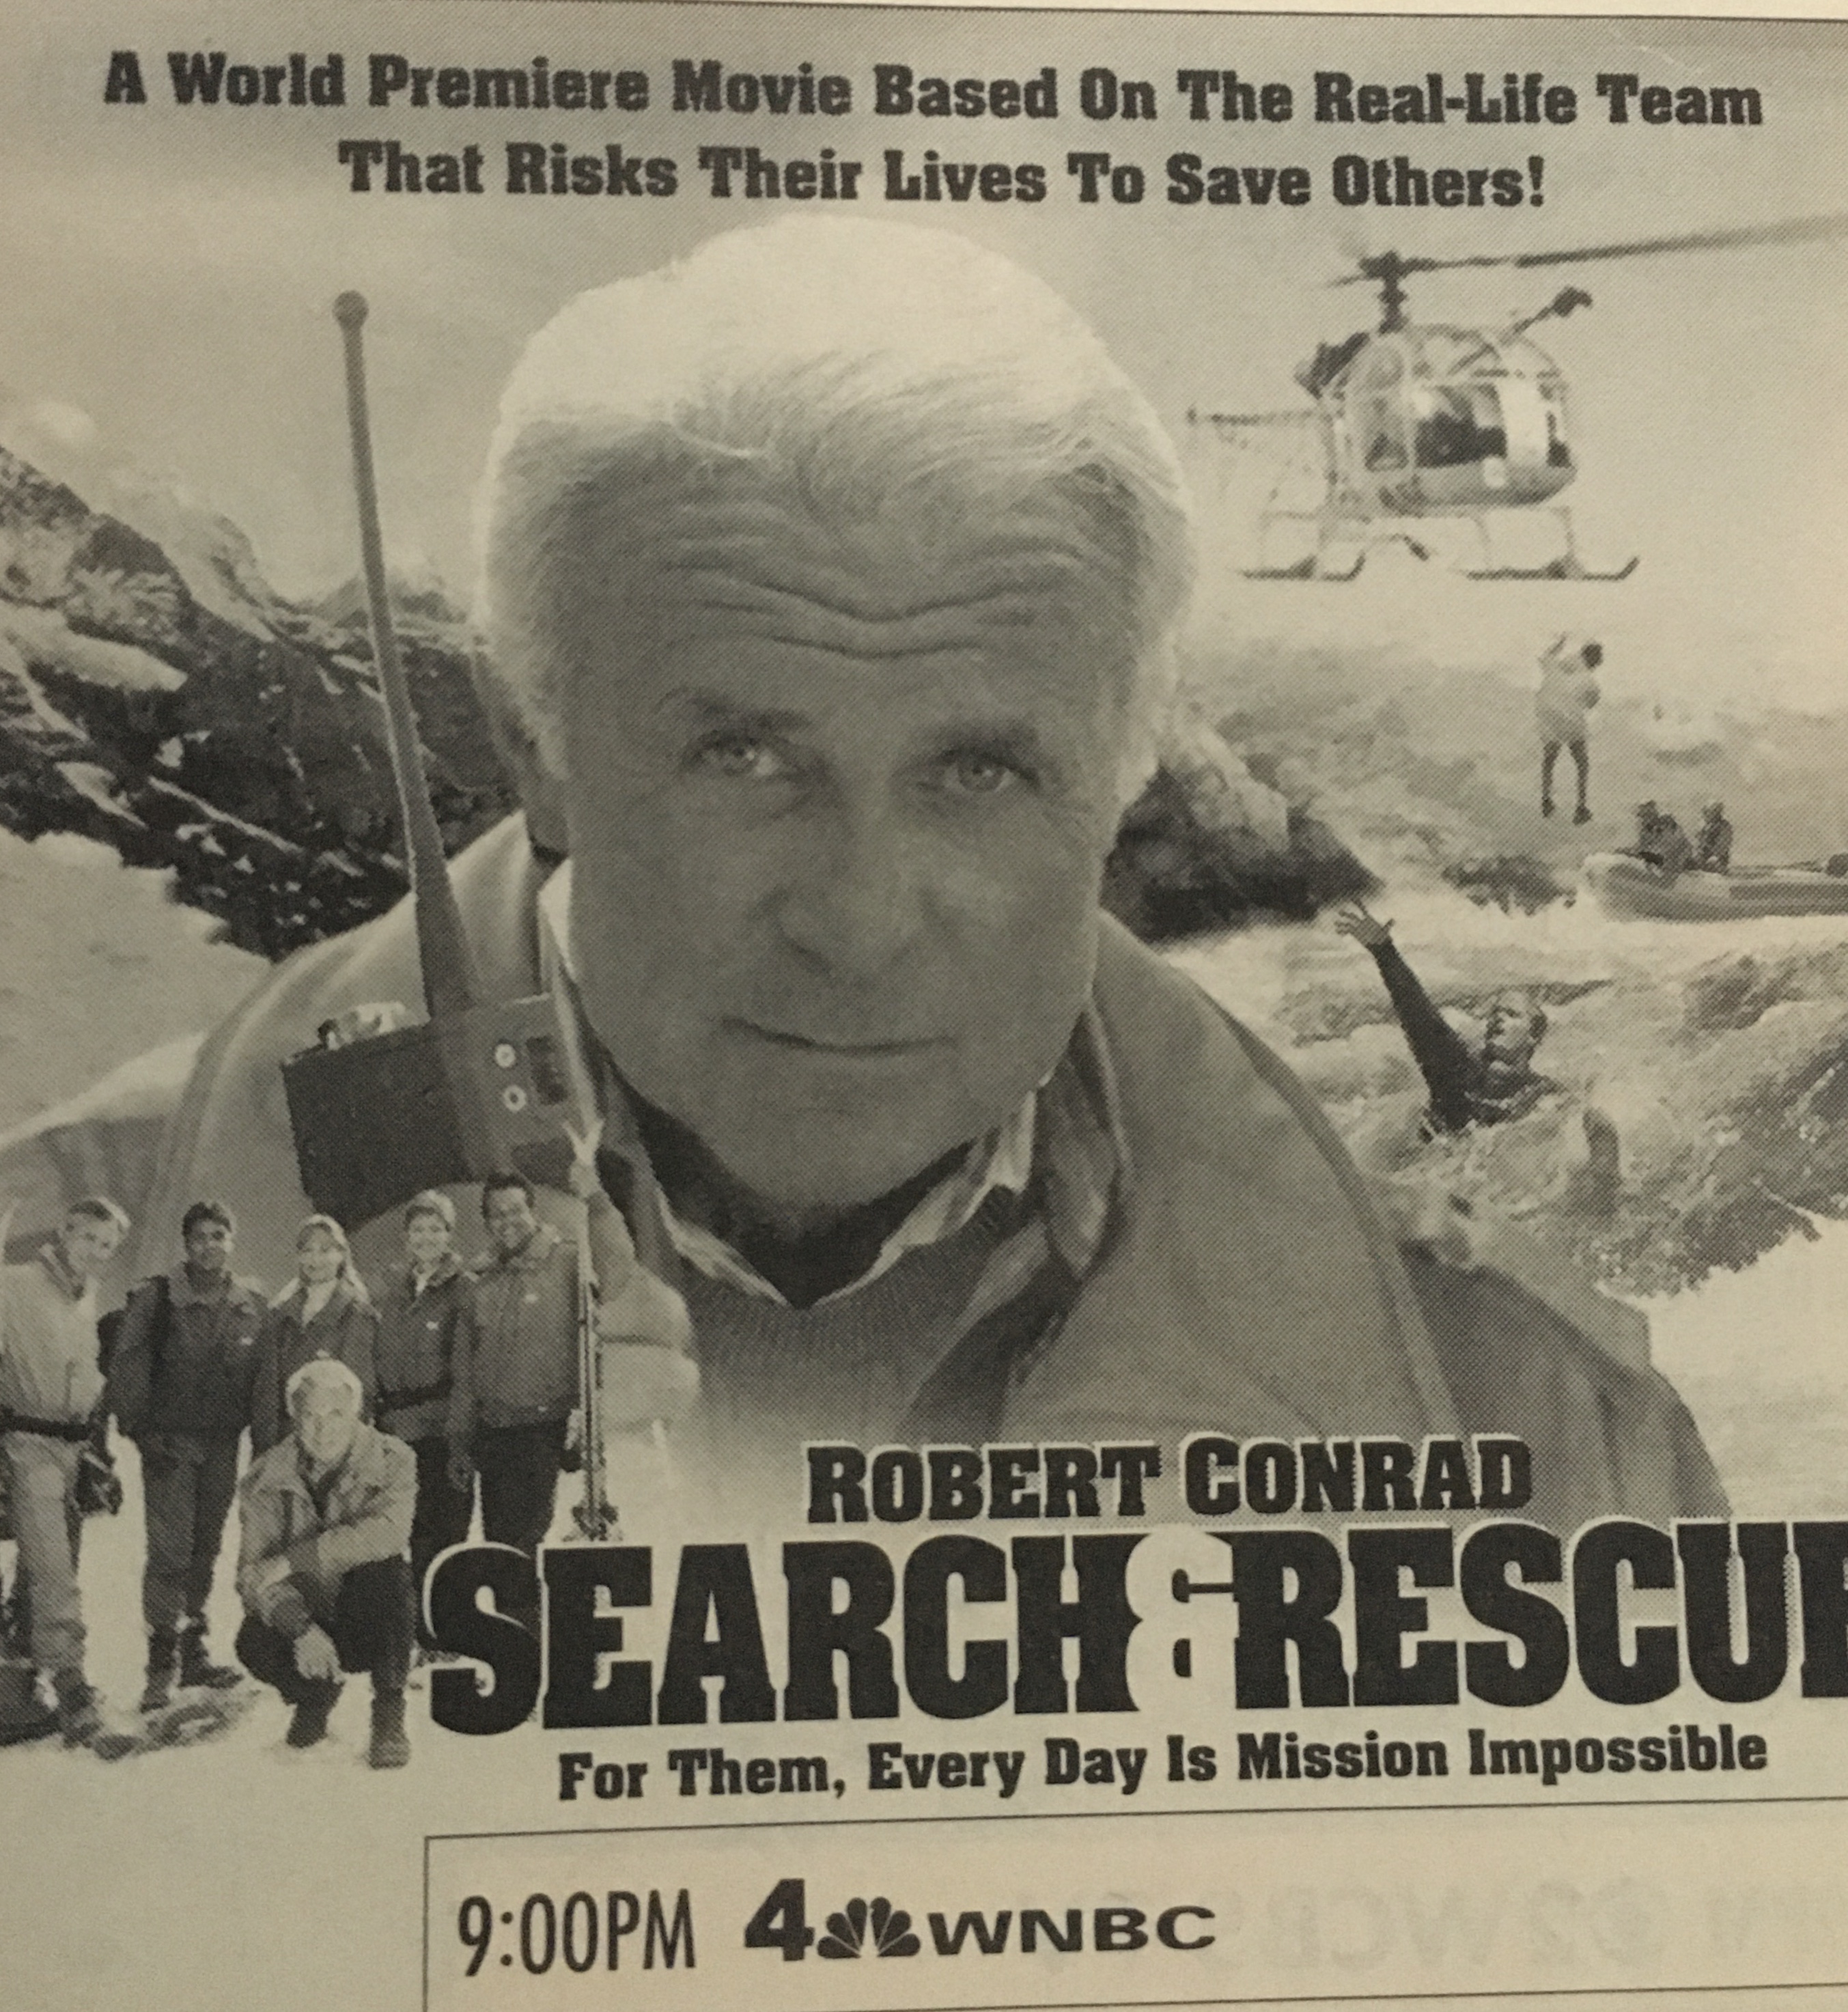 Search and Rescue (1994) Screenshot 2